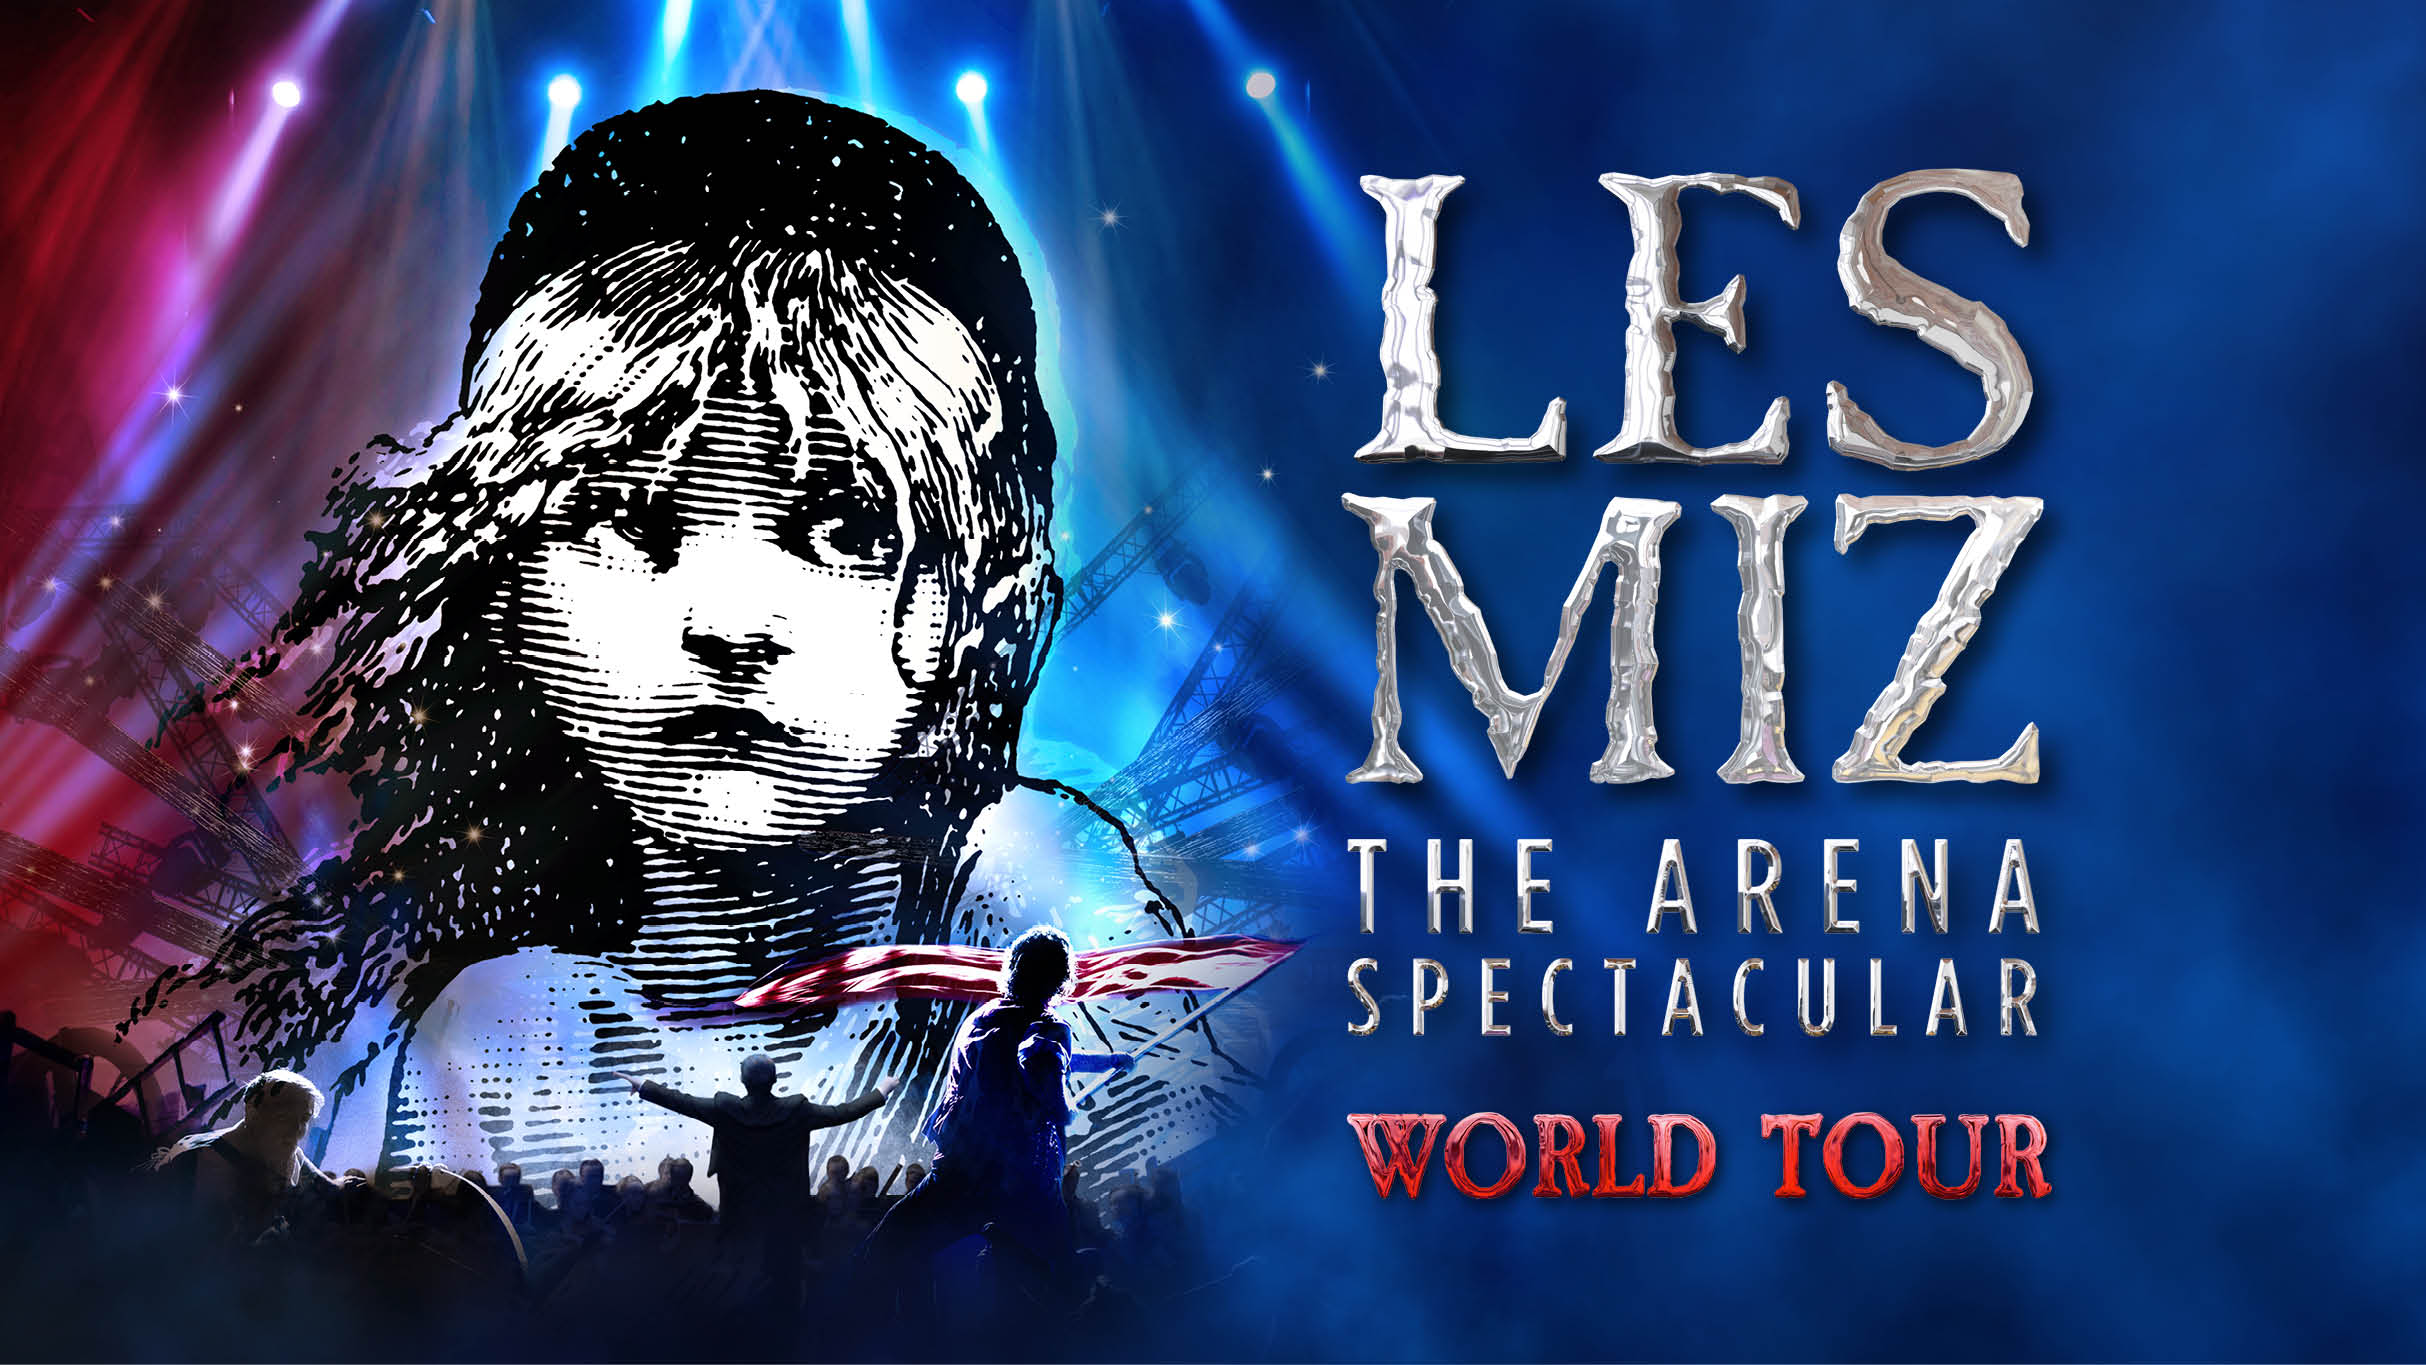 Image name Les Miserables The Arena Spectacular at Utilita Arena Sheffield Sheffield the 5 image from the post Les Miserables: The Arena Spectacular at Utilita Arena Sheffield, Sheffield in Yorkshire.com.